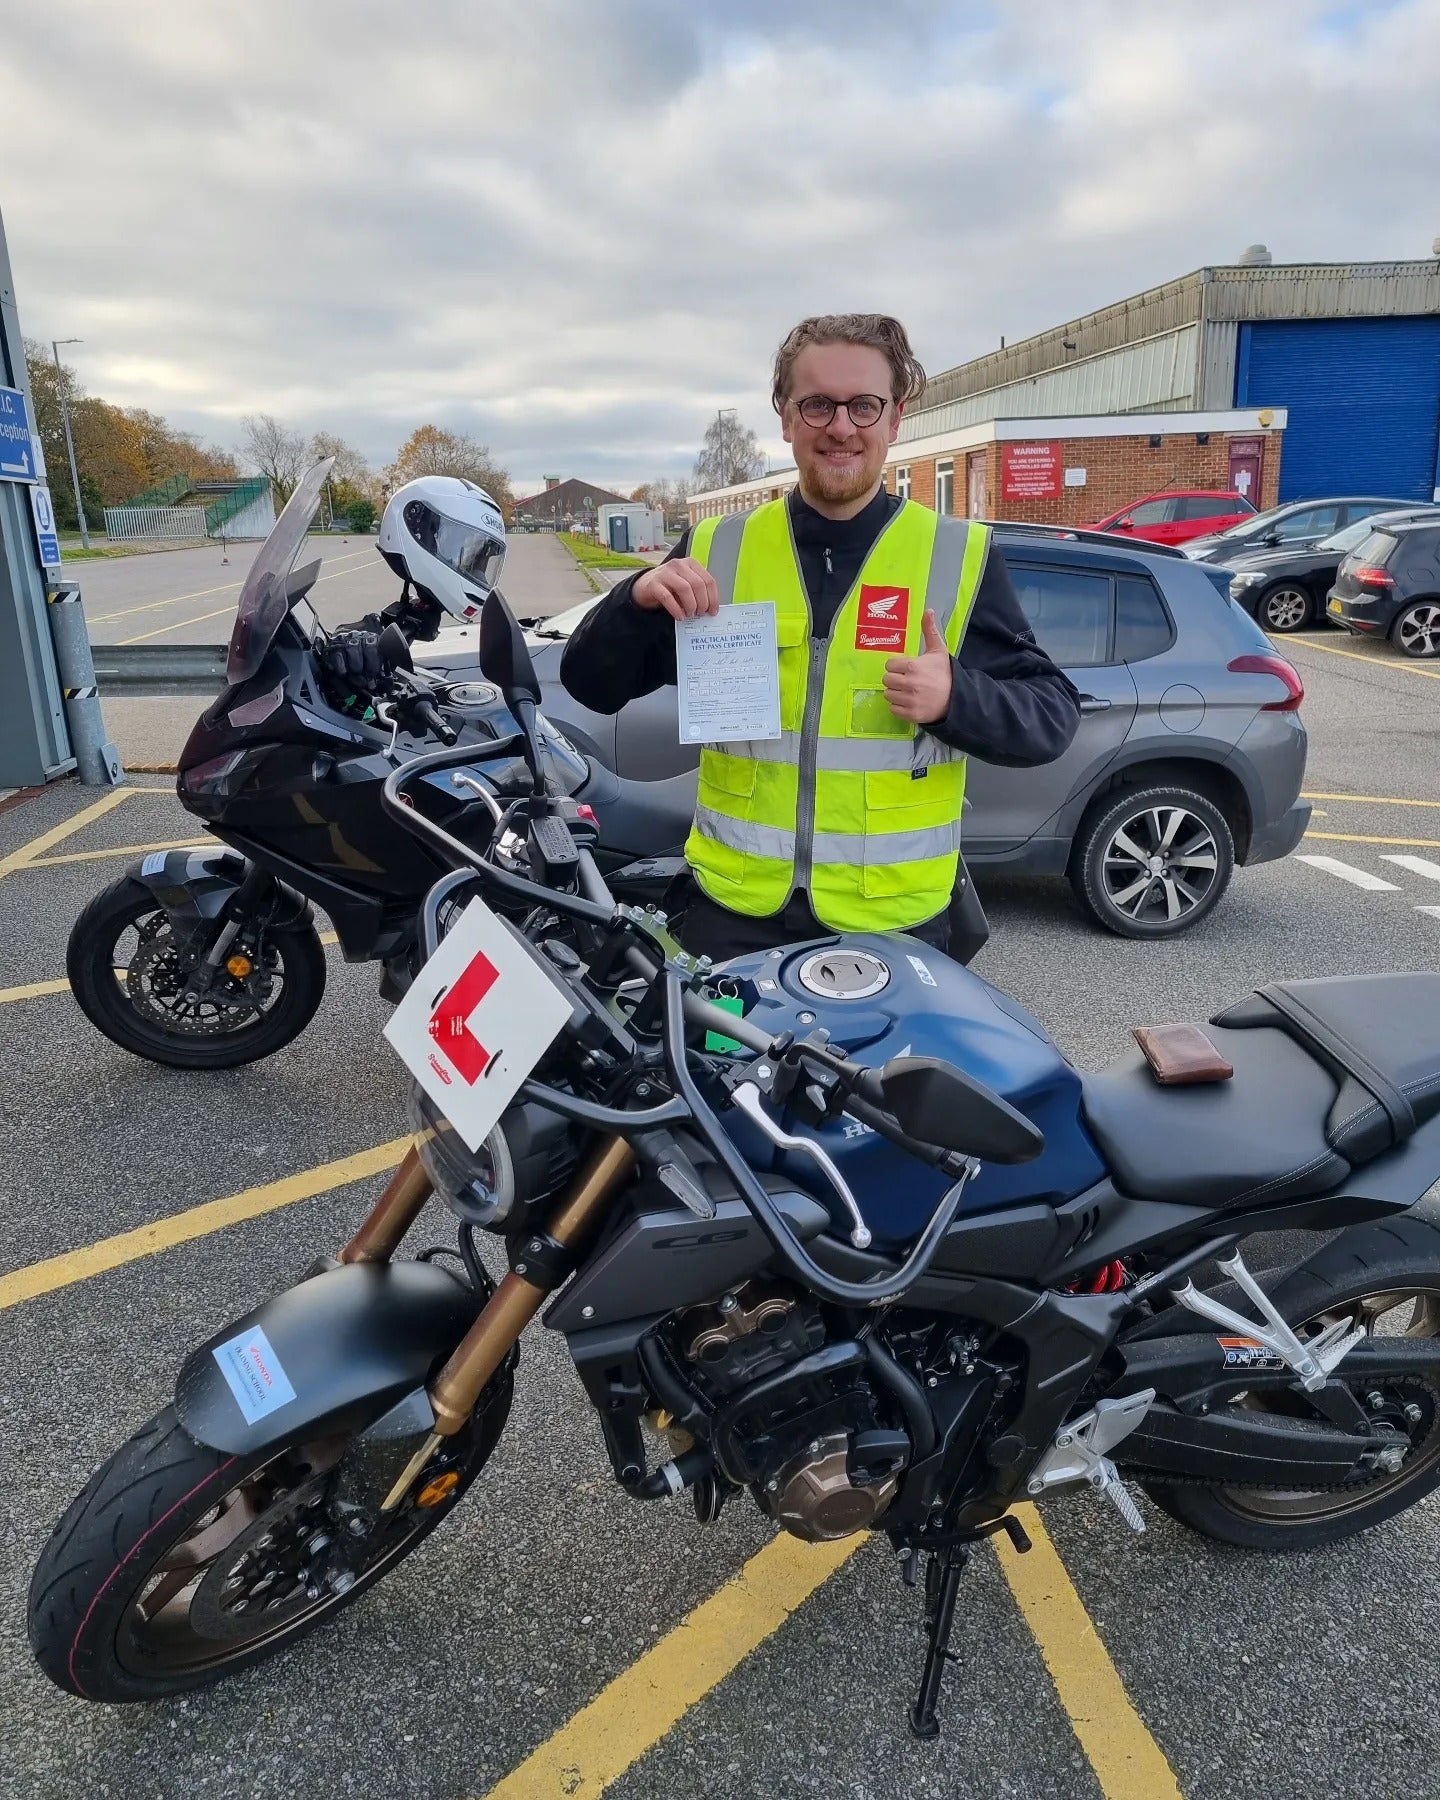 Motorcycle Training in Bournemouth, Motorcycle Training in Dorset, Book your CBT, Full License Motorbike License, Honda of Bournemouth